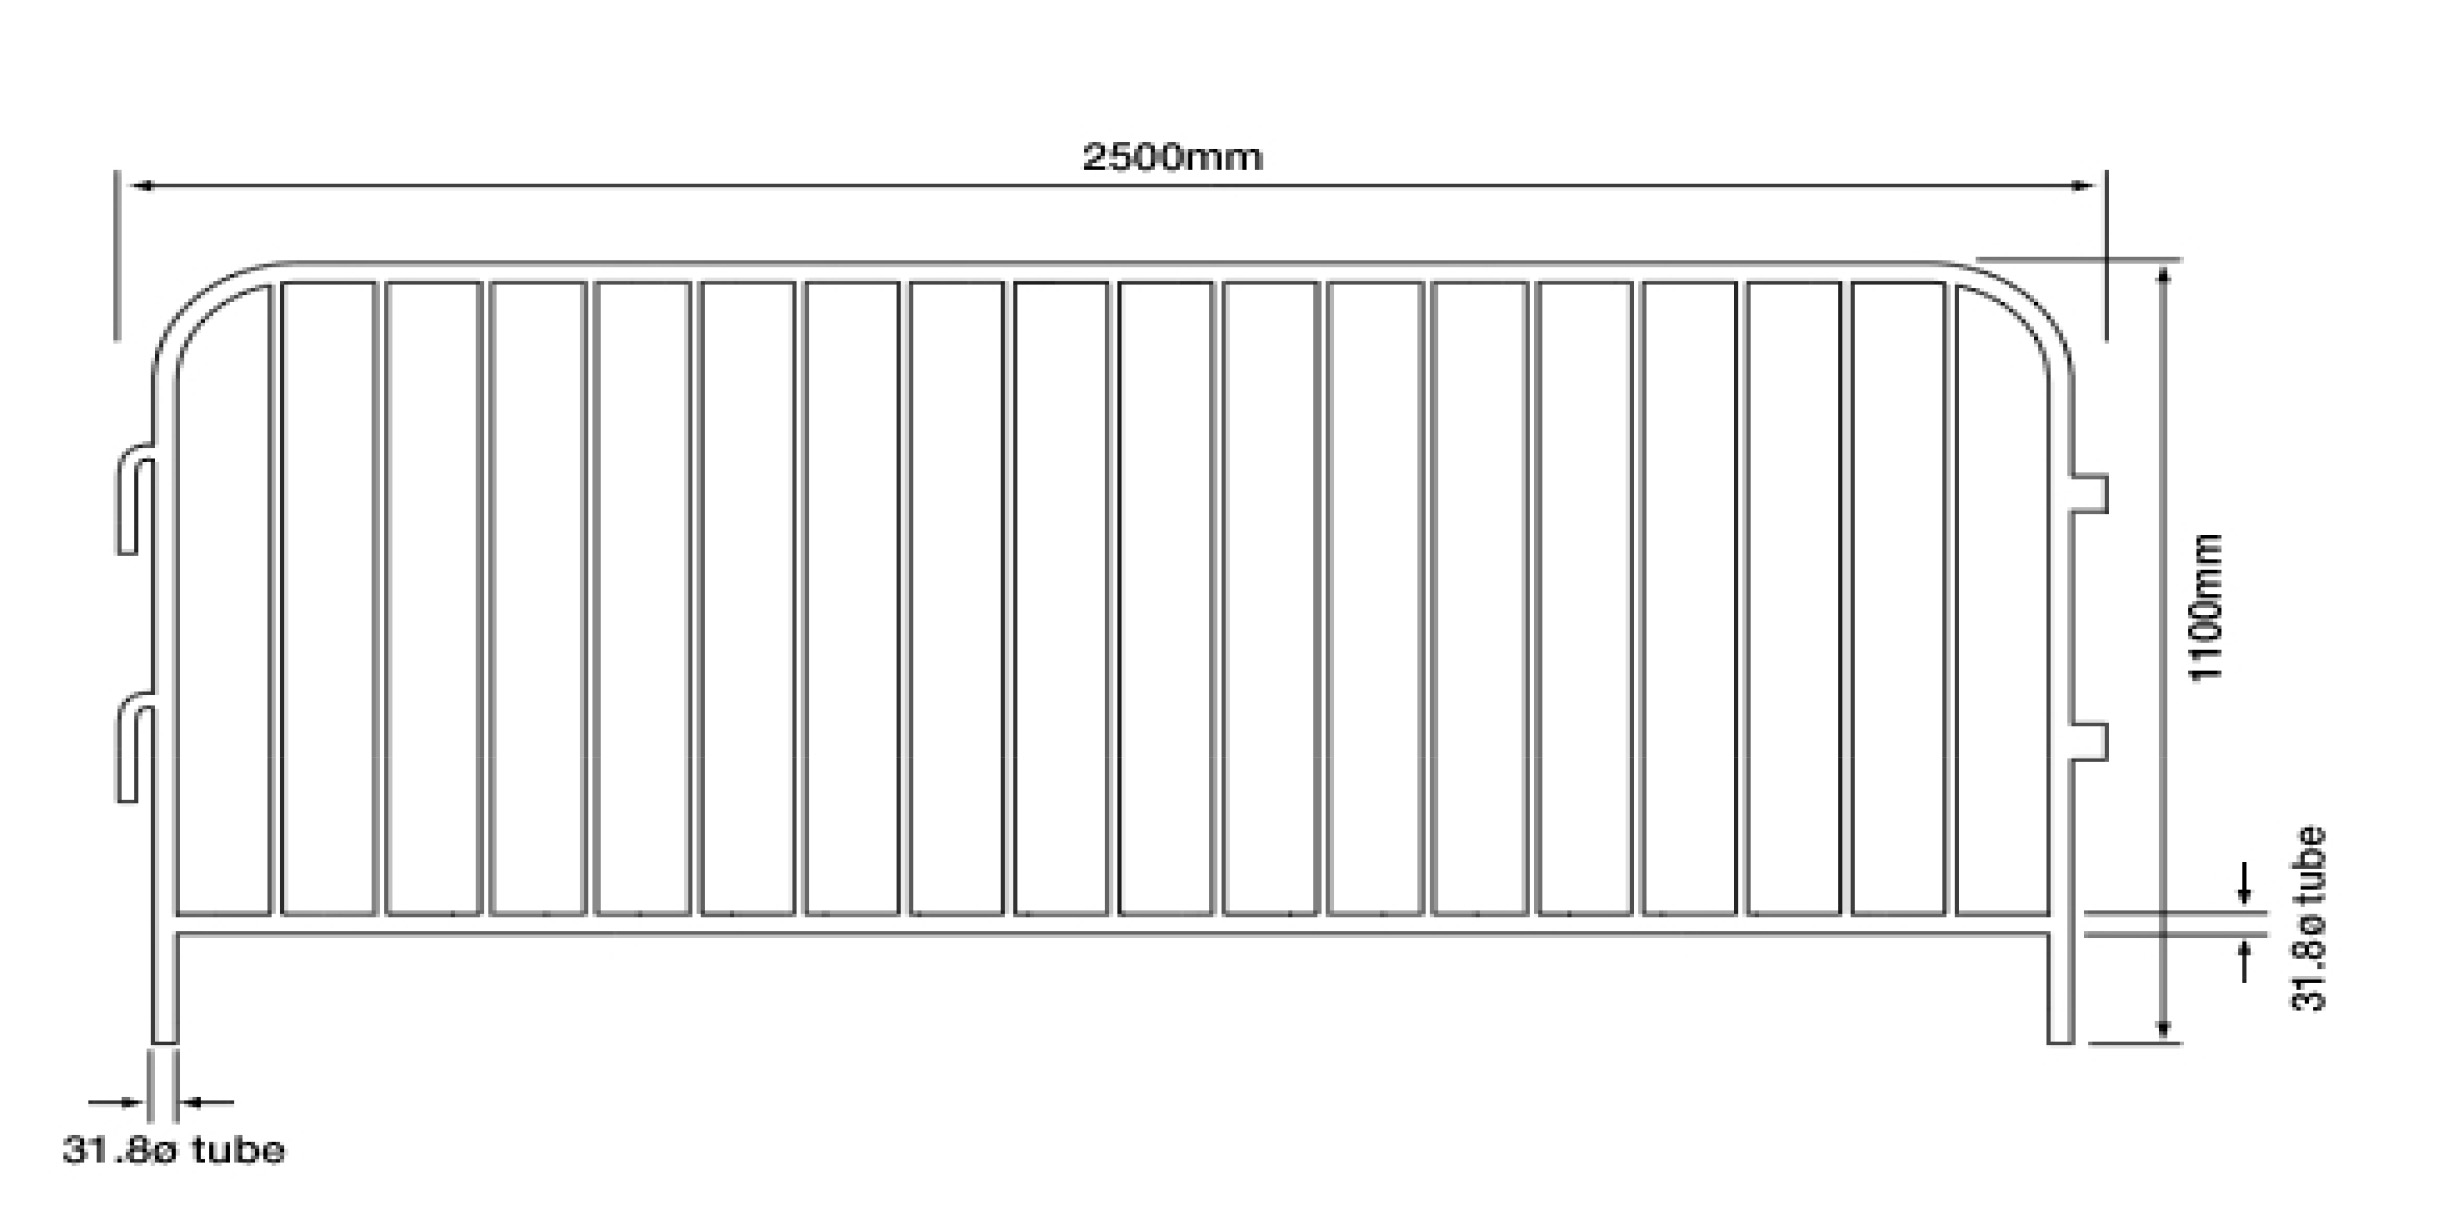 Crowd barrier fence panel constructed from 38.1 mm diameter galvanized steel frame - BE Event Hire